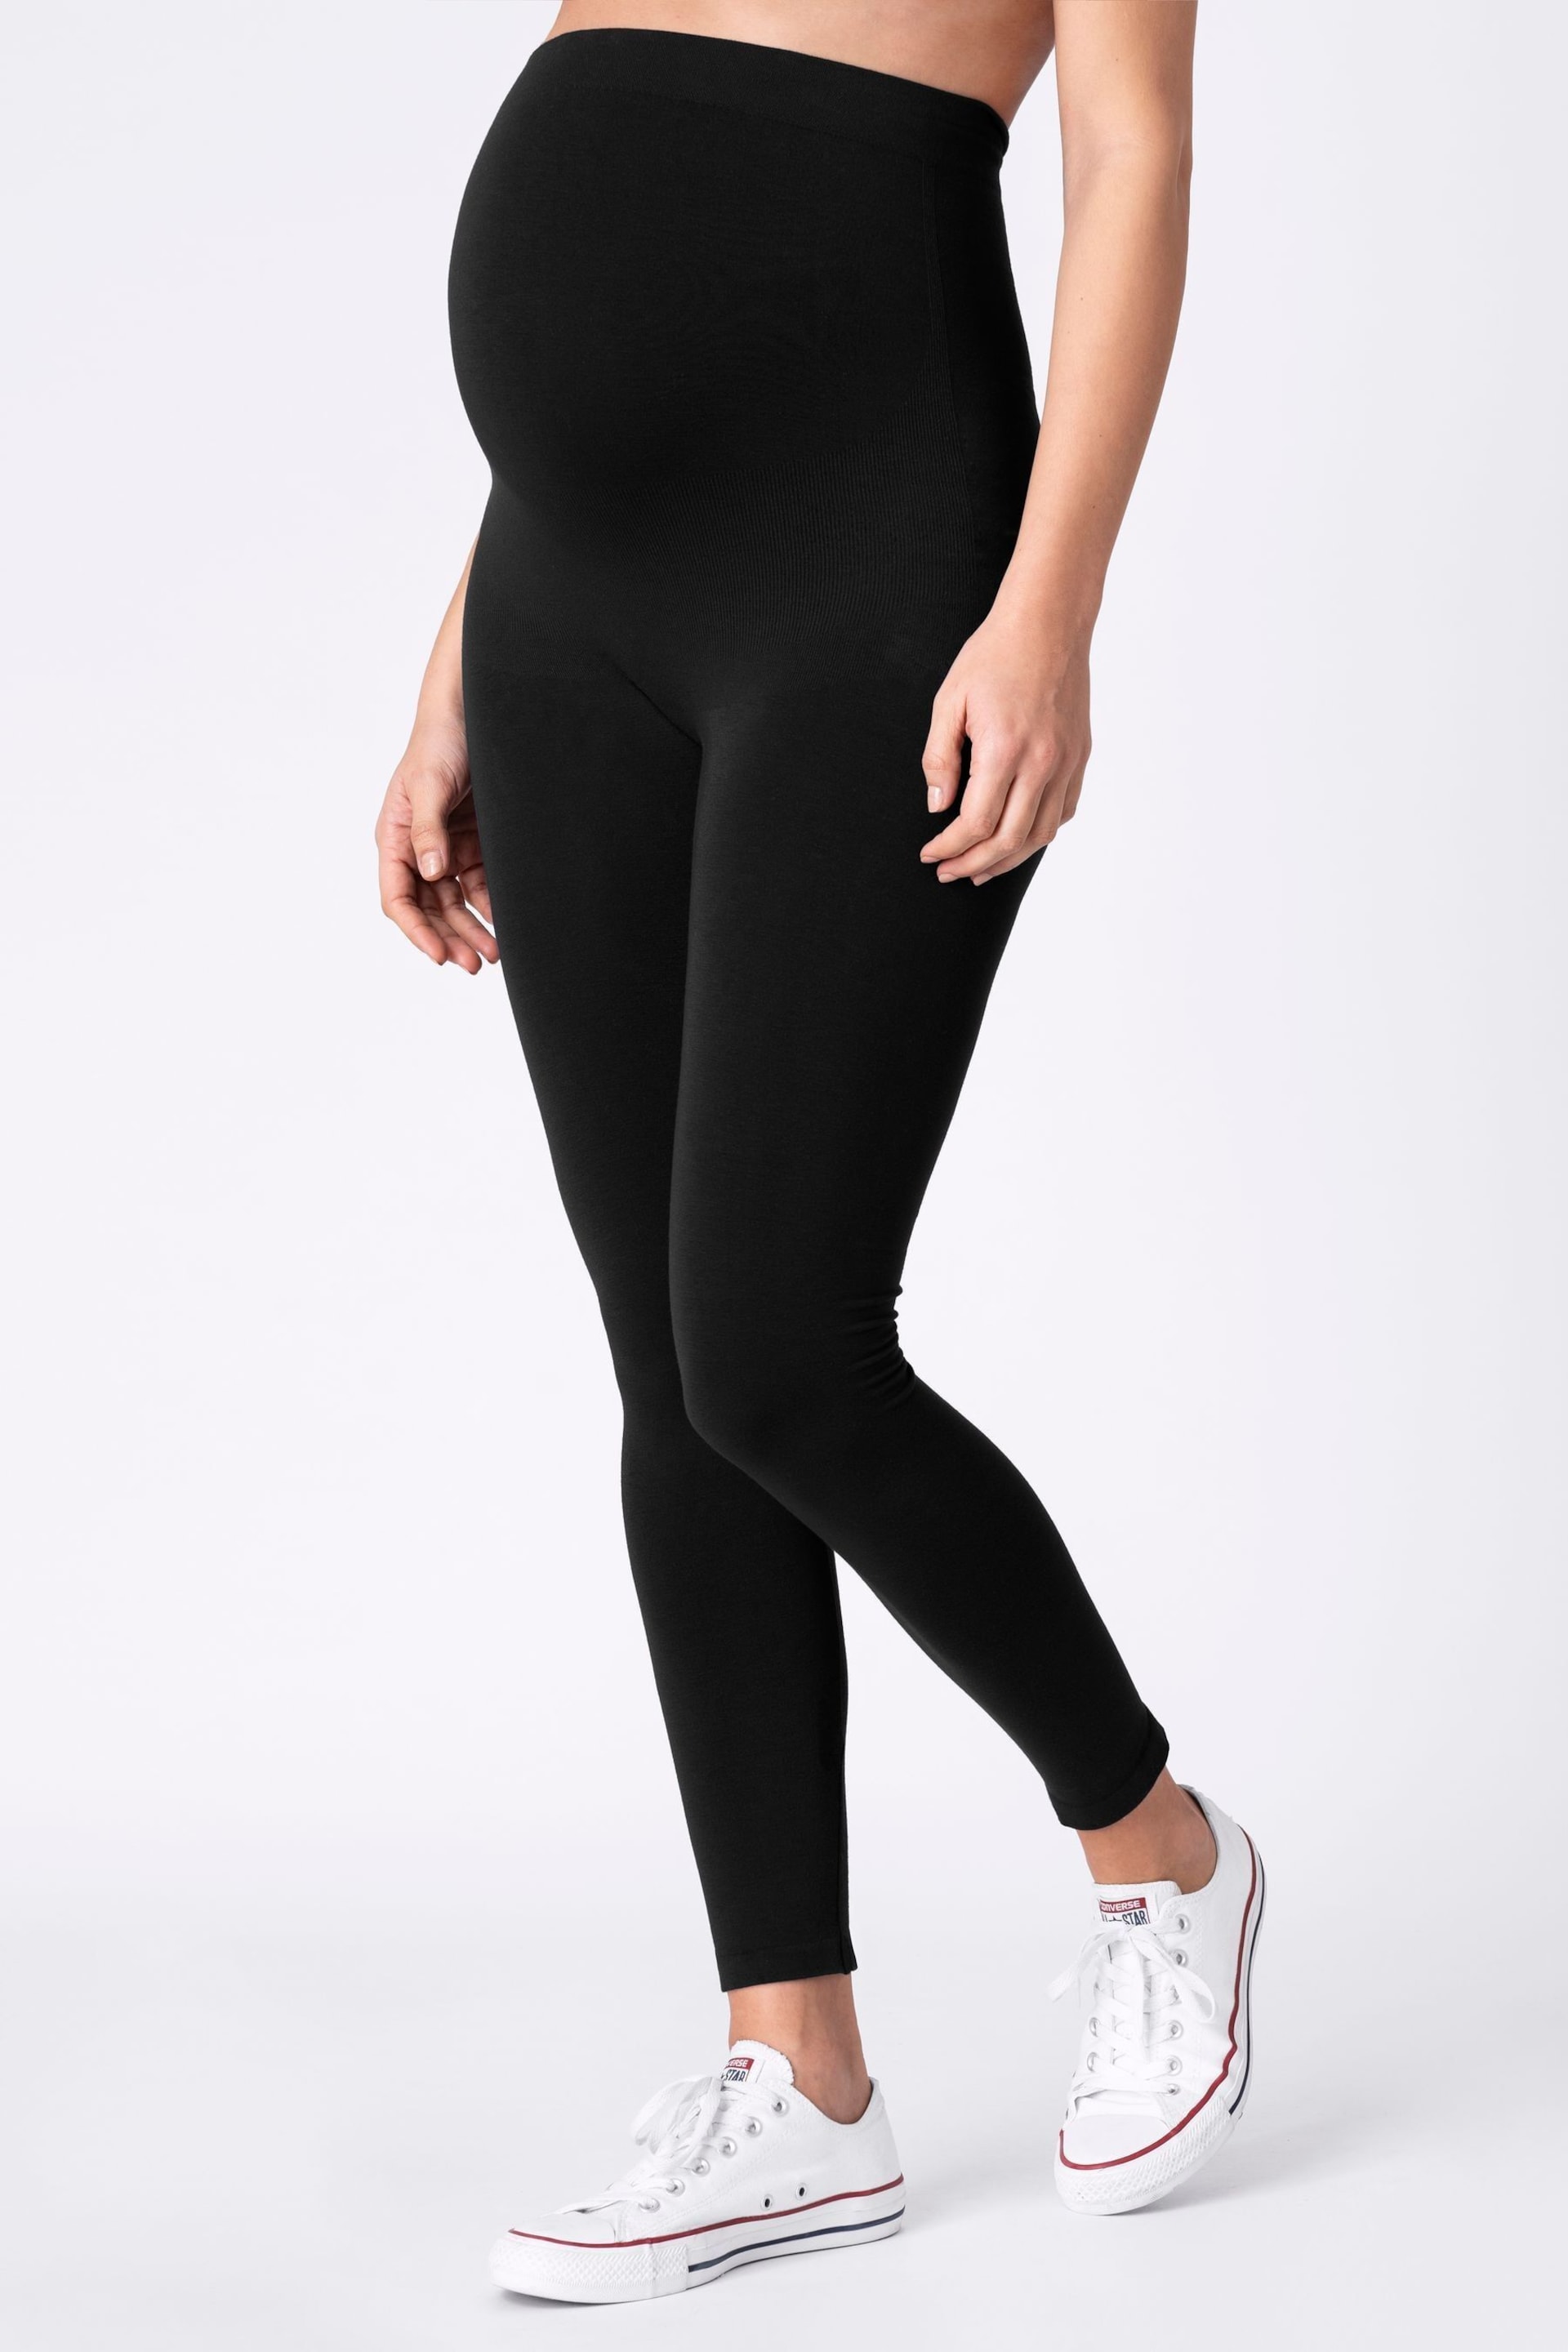 Seraphine Black and Grey Bamboo Maternity Leggings – Twin Pack - Image 4 of 5